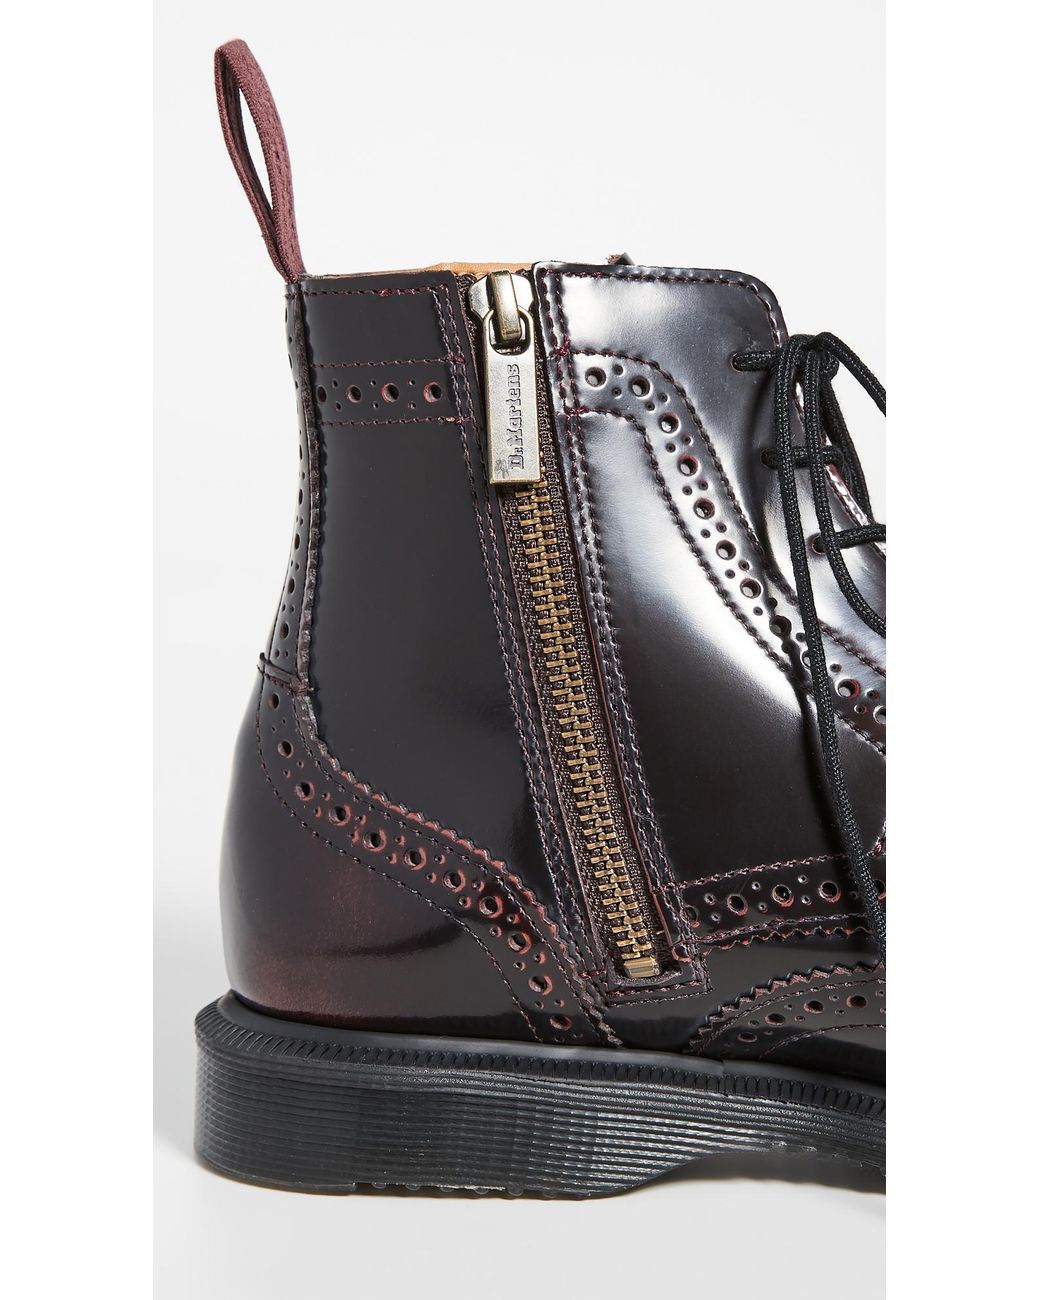 Dr. Martens Leather Delphine 6 Eye Brogue Boots in Cherry Red (Black) | Lyst